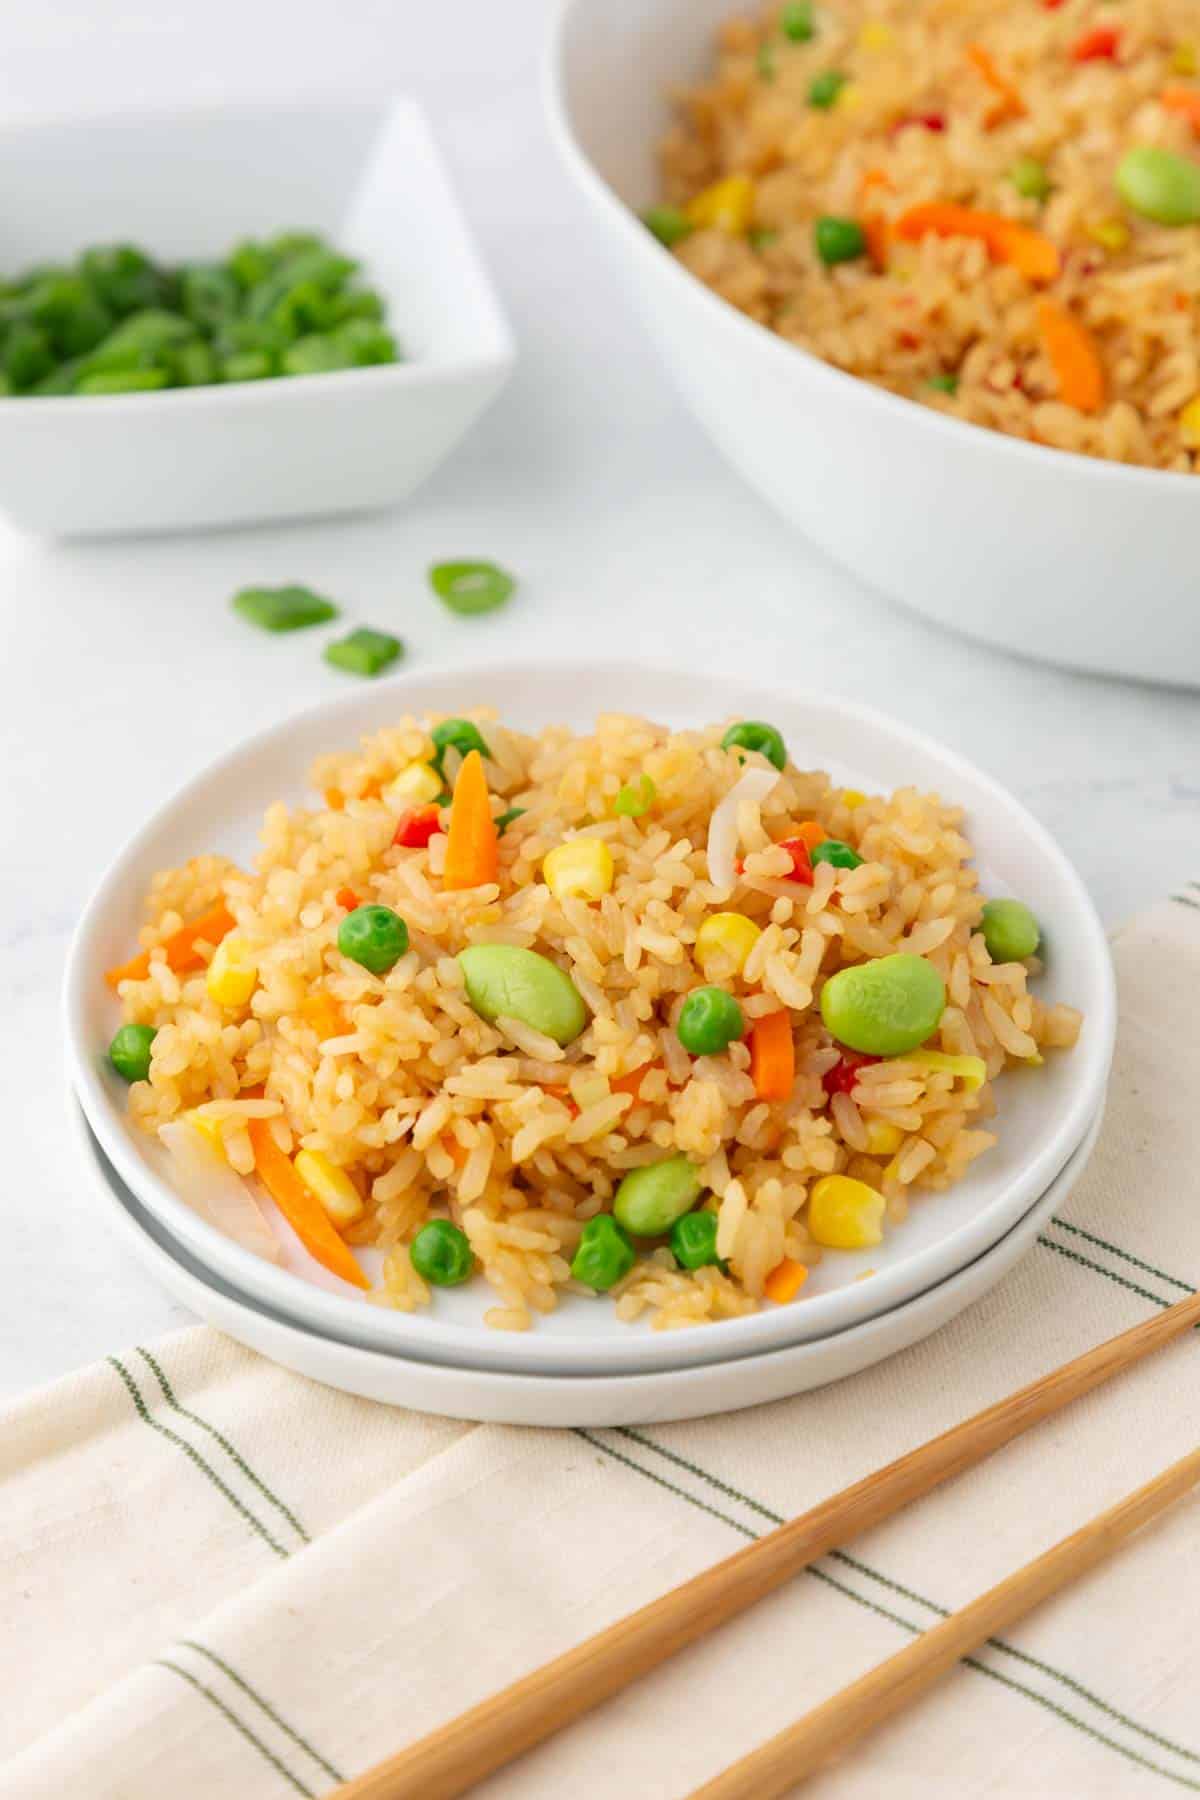 Vegetable Fried Rice from Trader Joe's on a small white plate.